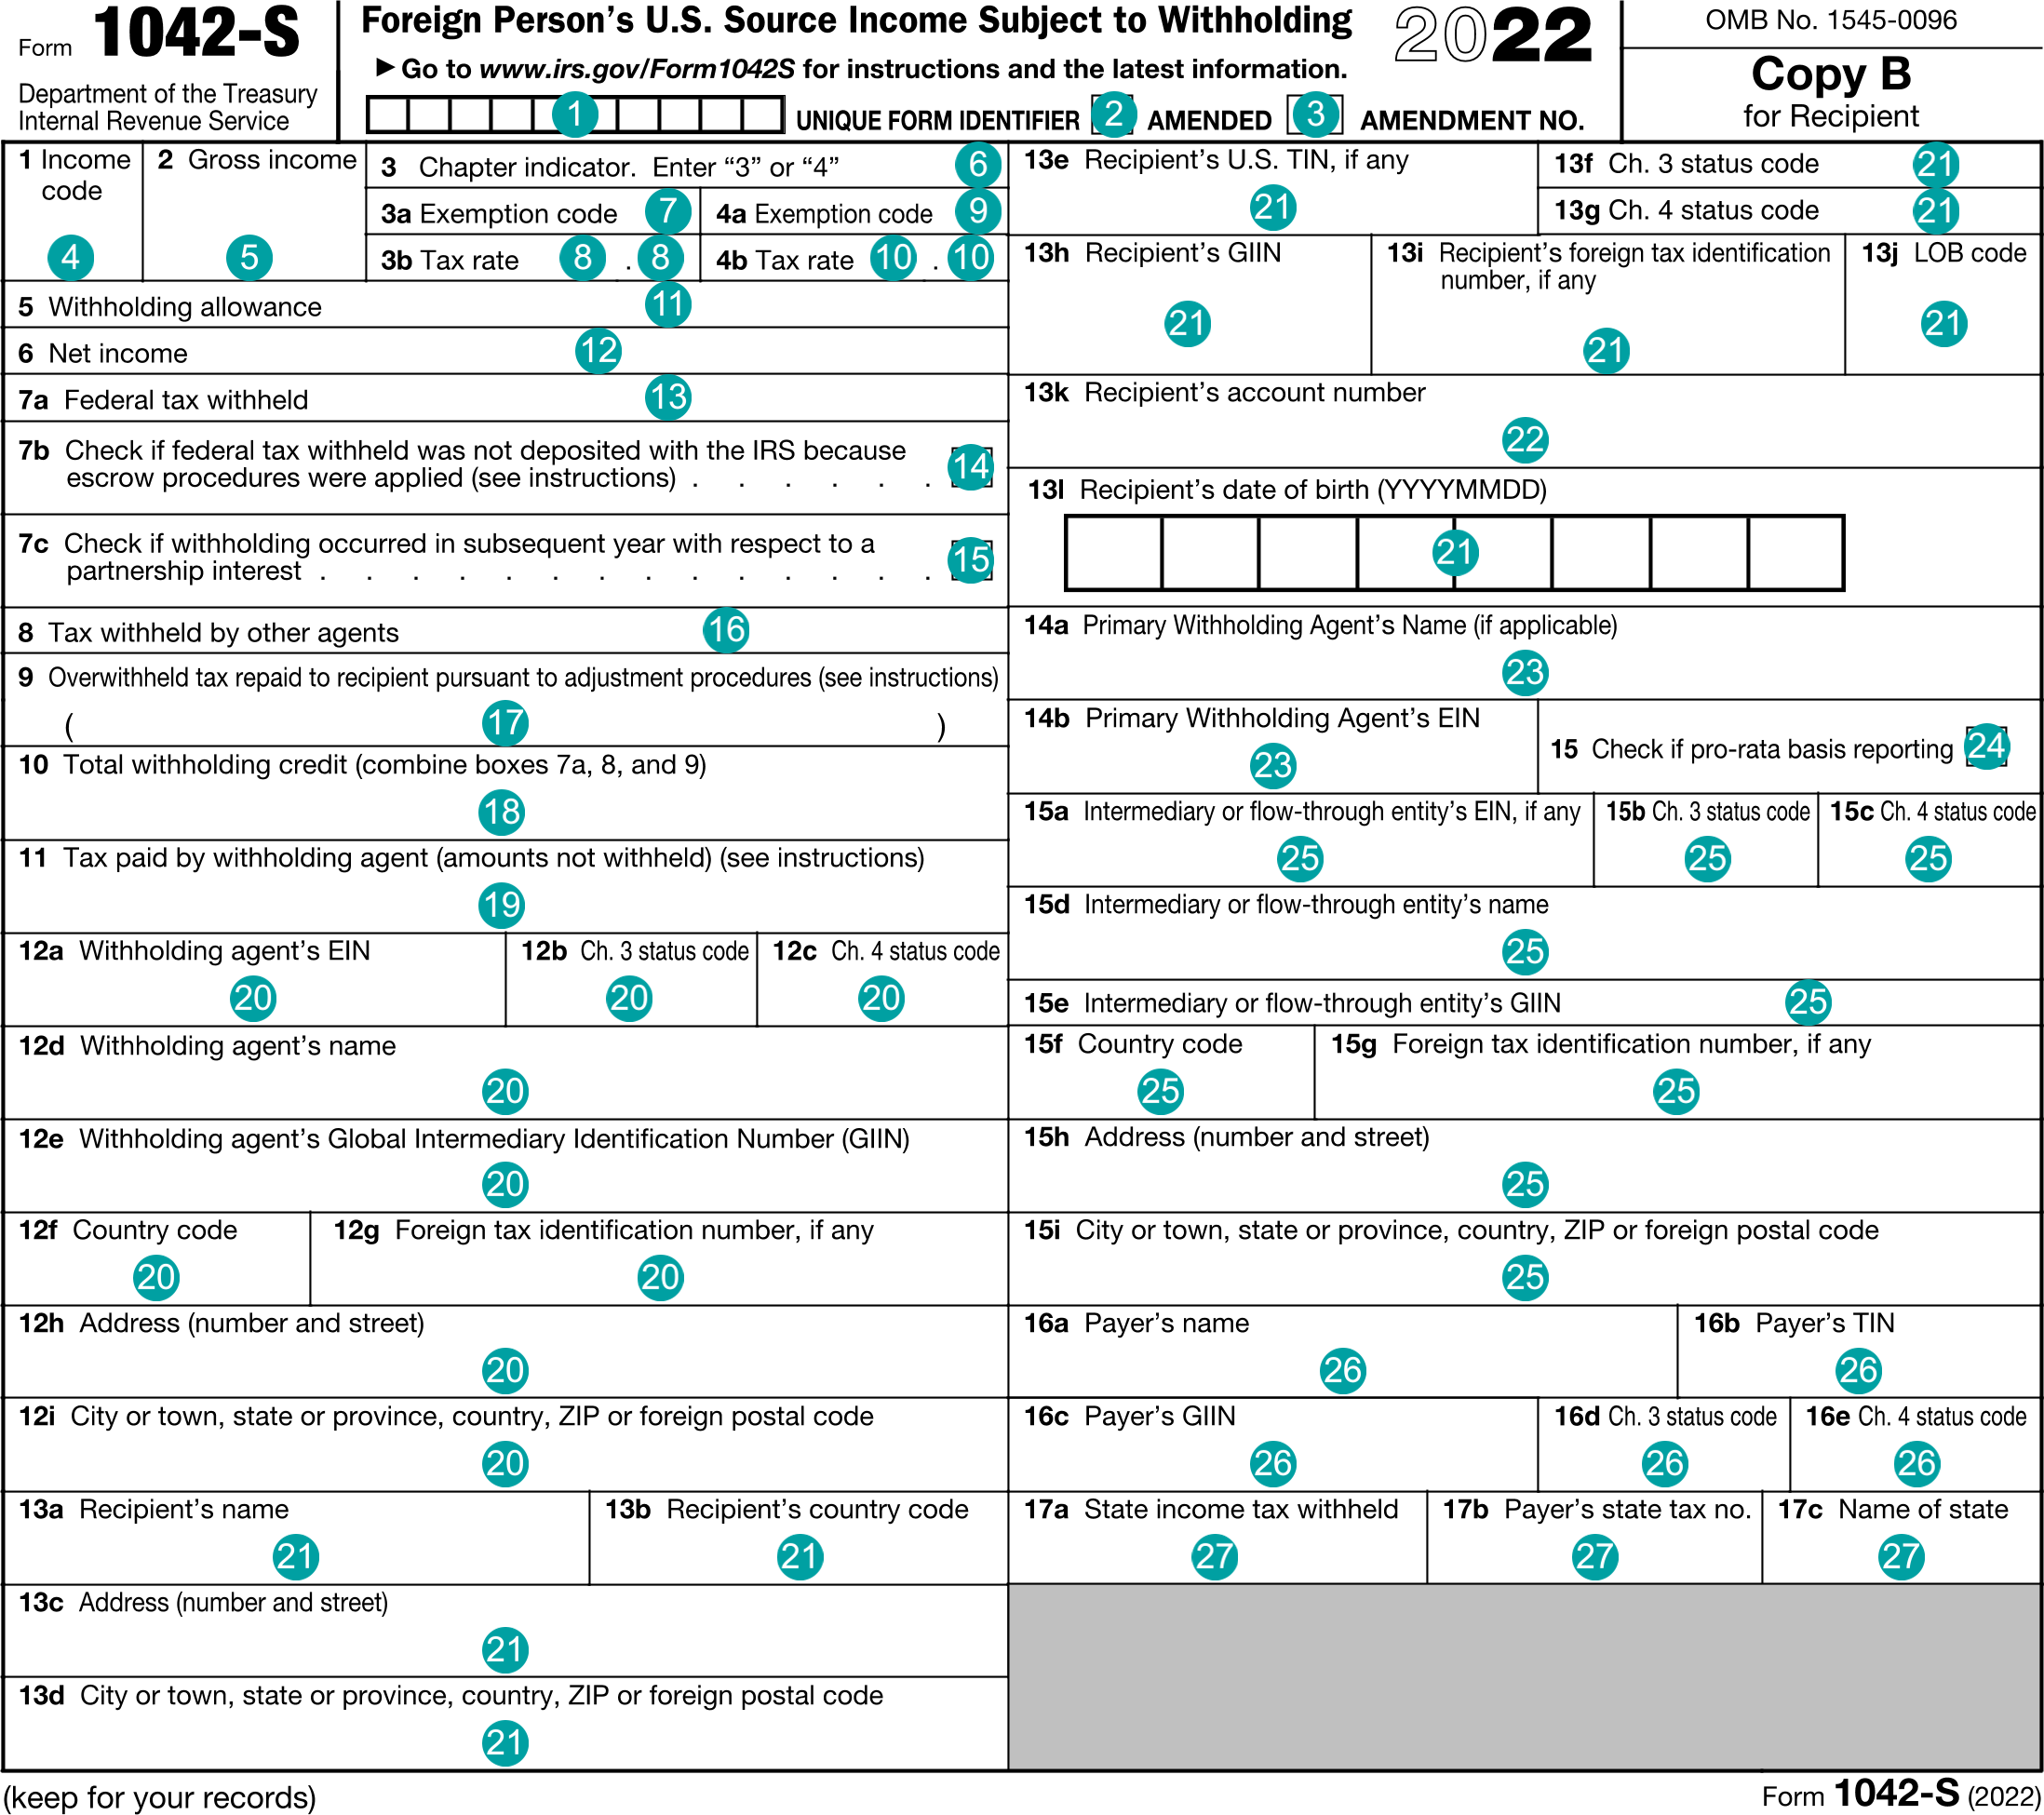 /img/forms/Tax1042S/2022/v5.0/Tax1042S.Recipient.Form.annotated.fdx.png